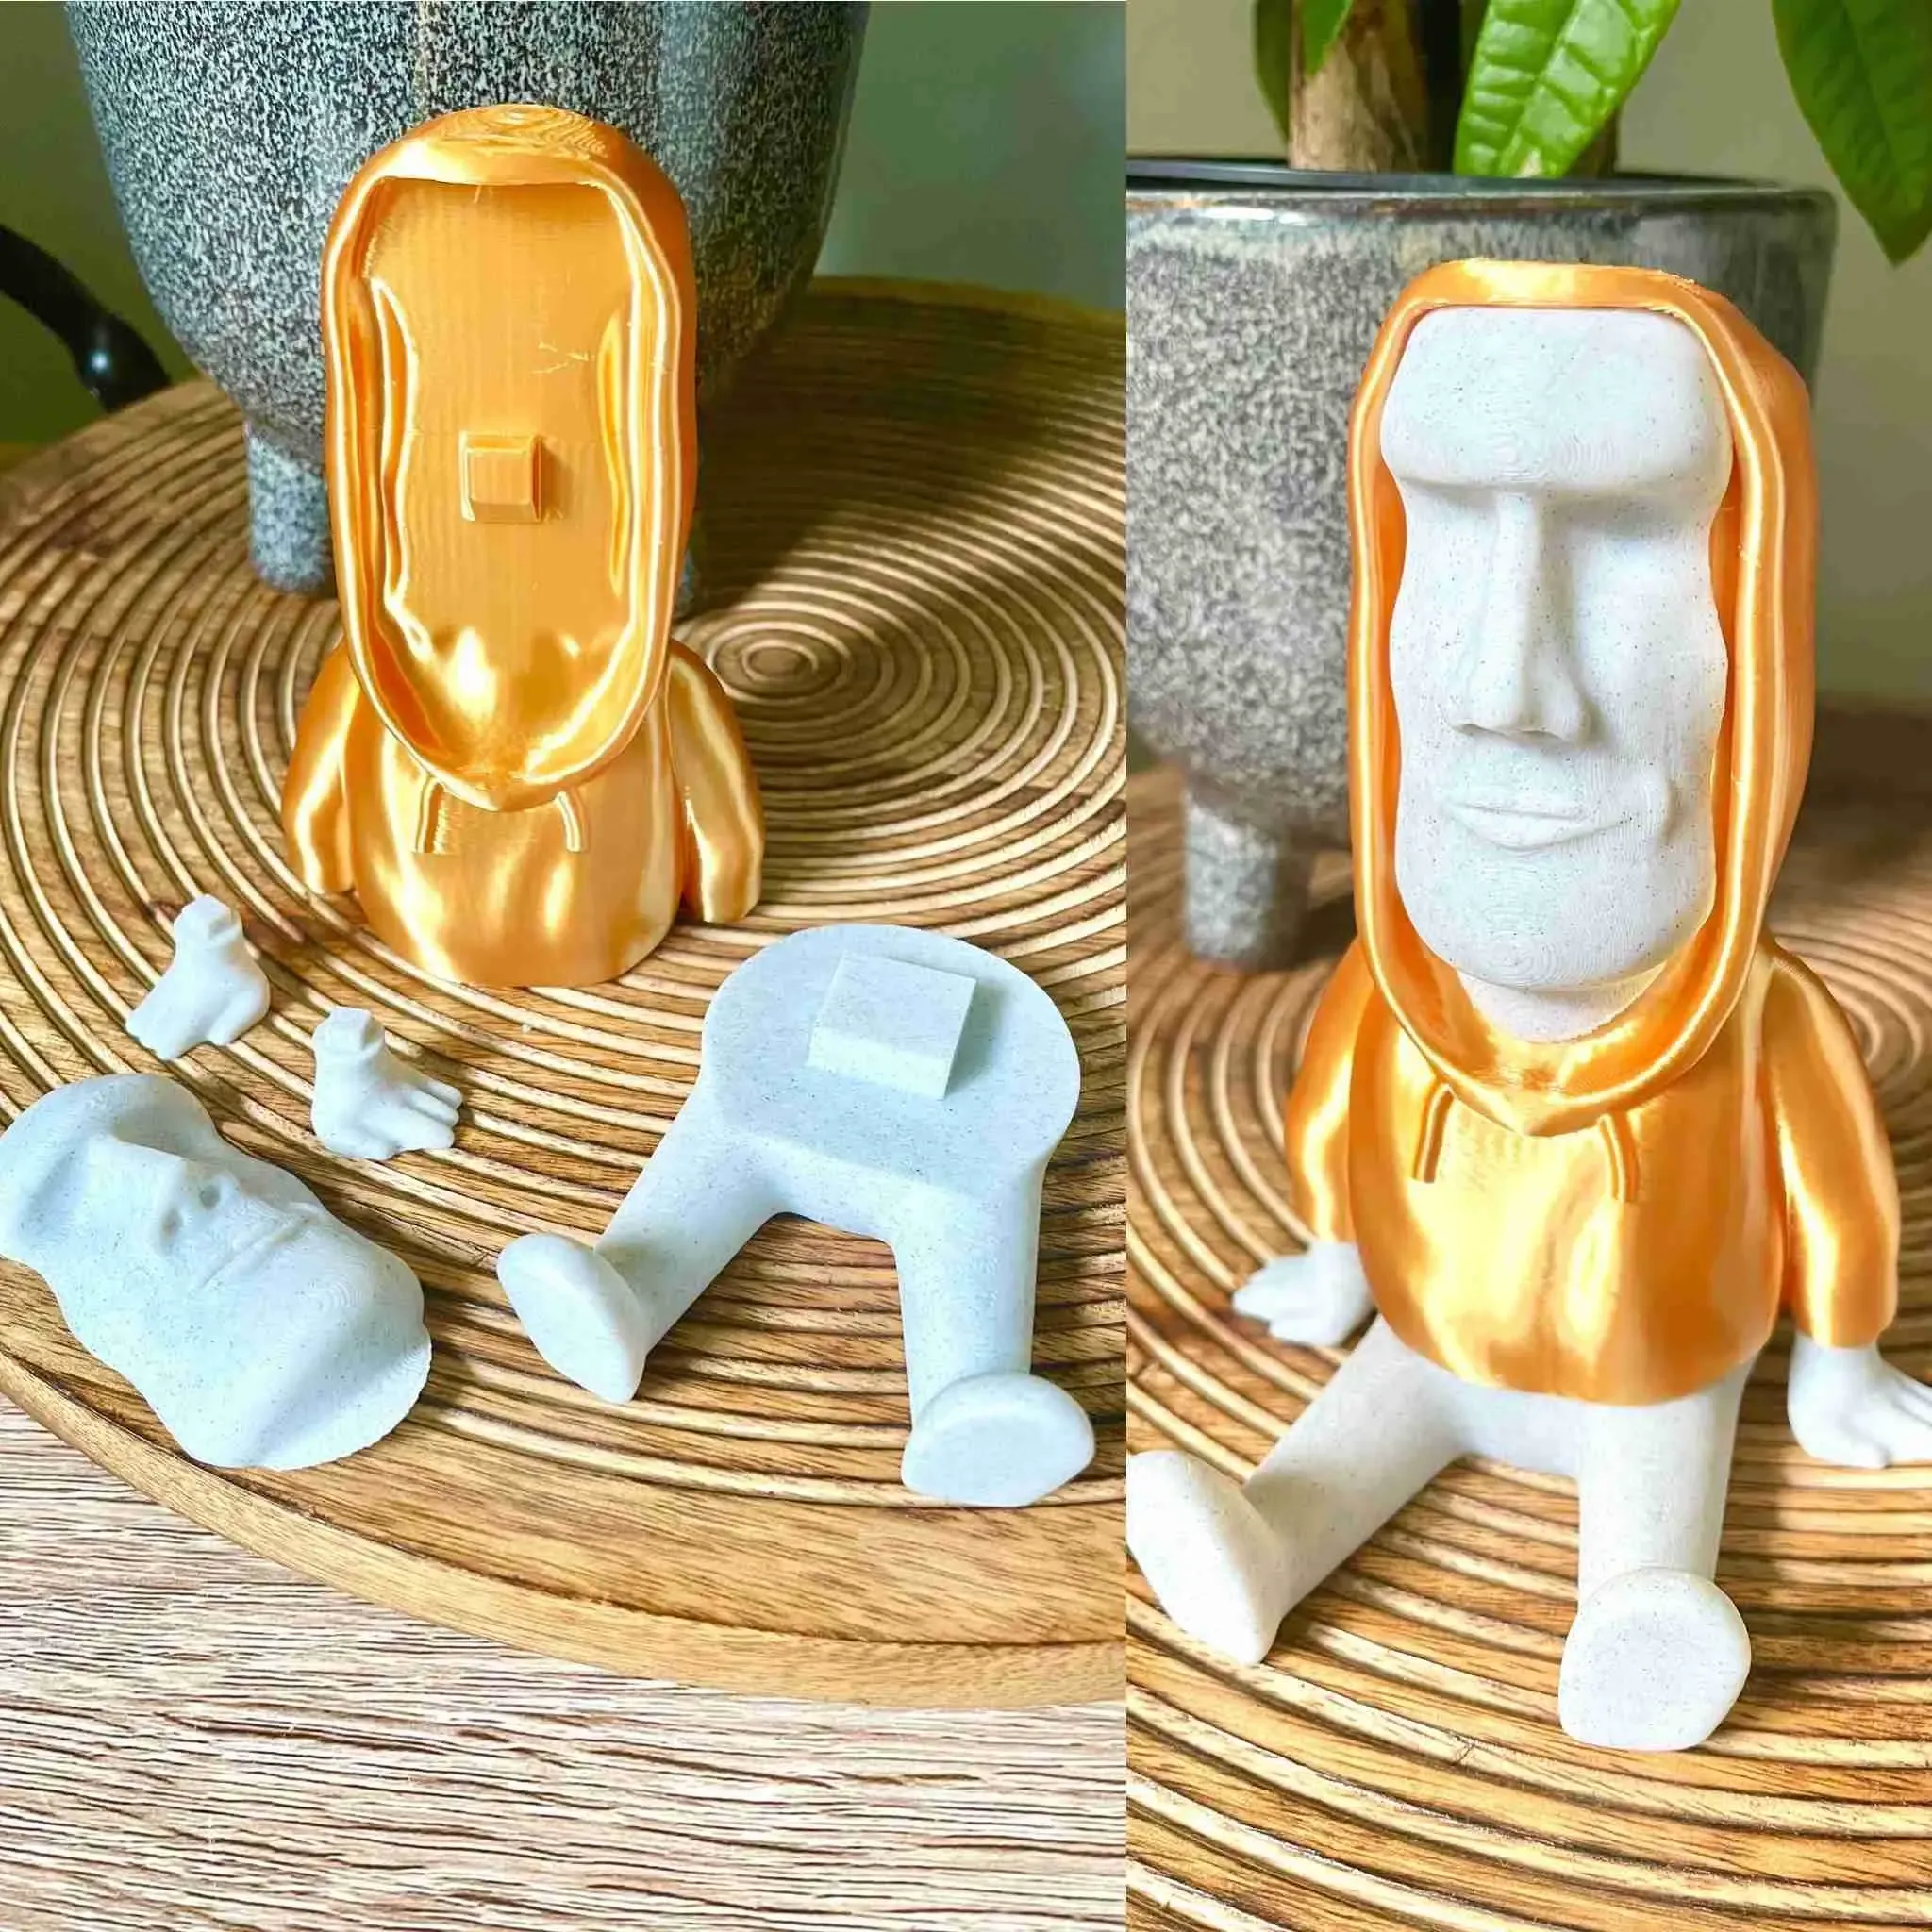 Moai Phone Holder - Multiparts - No supports